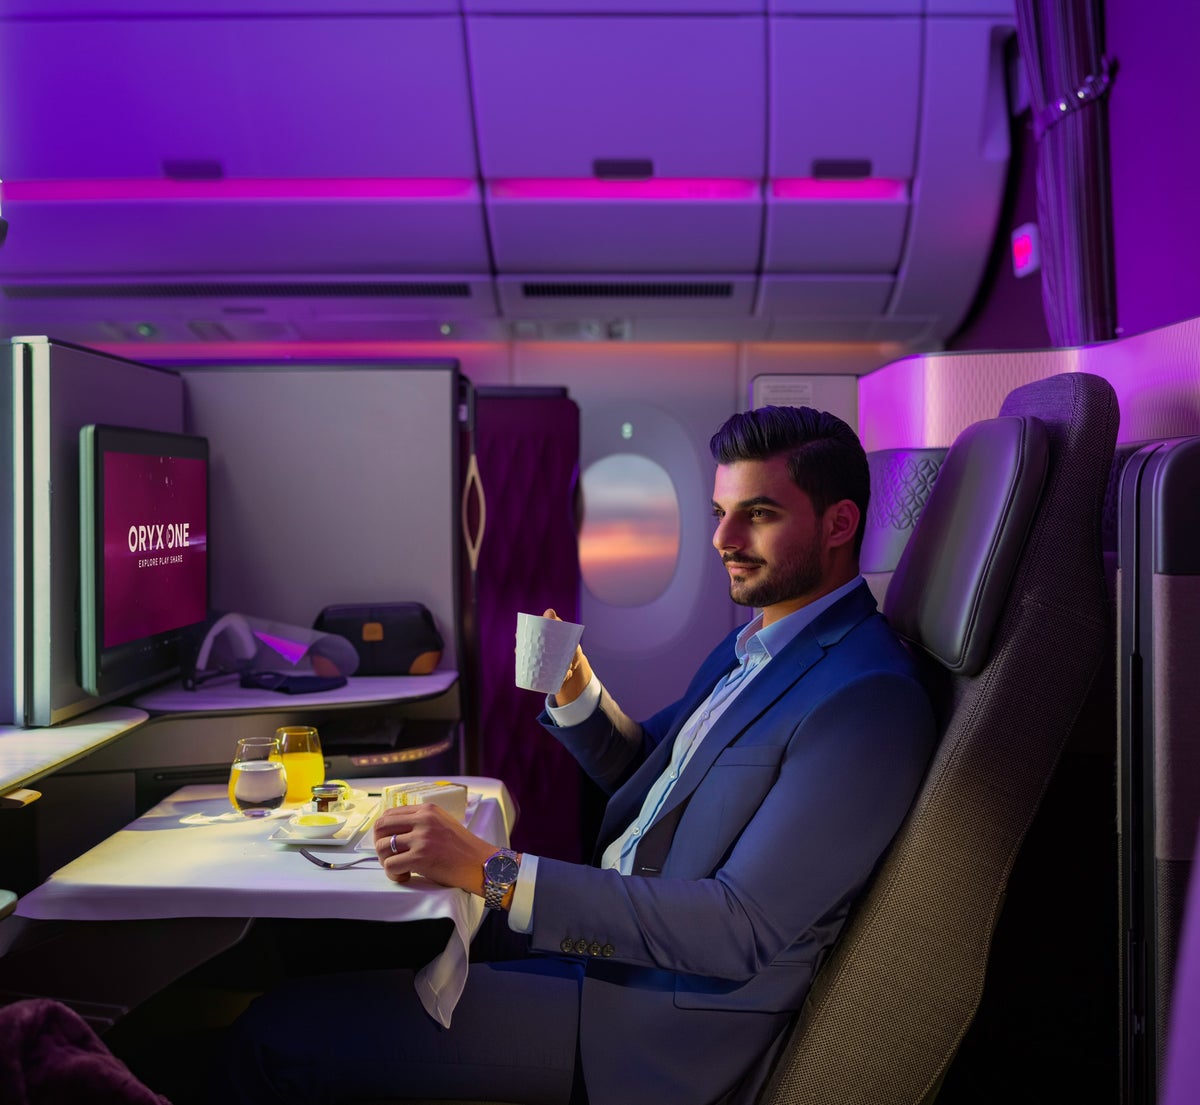 The World’s 21 Best Business Class Seats for Solo Travelers